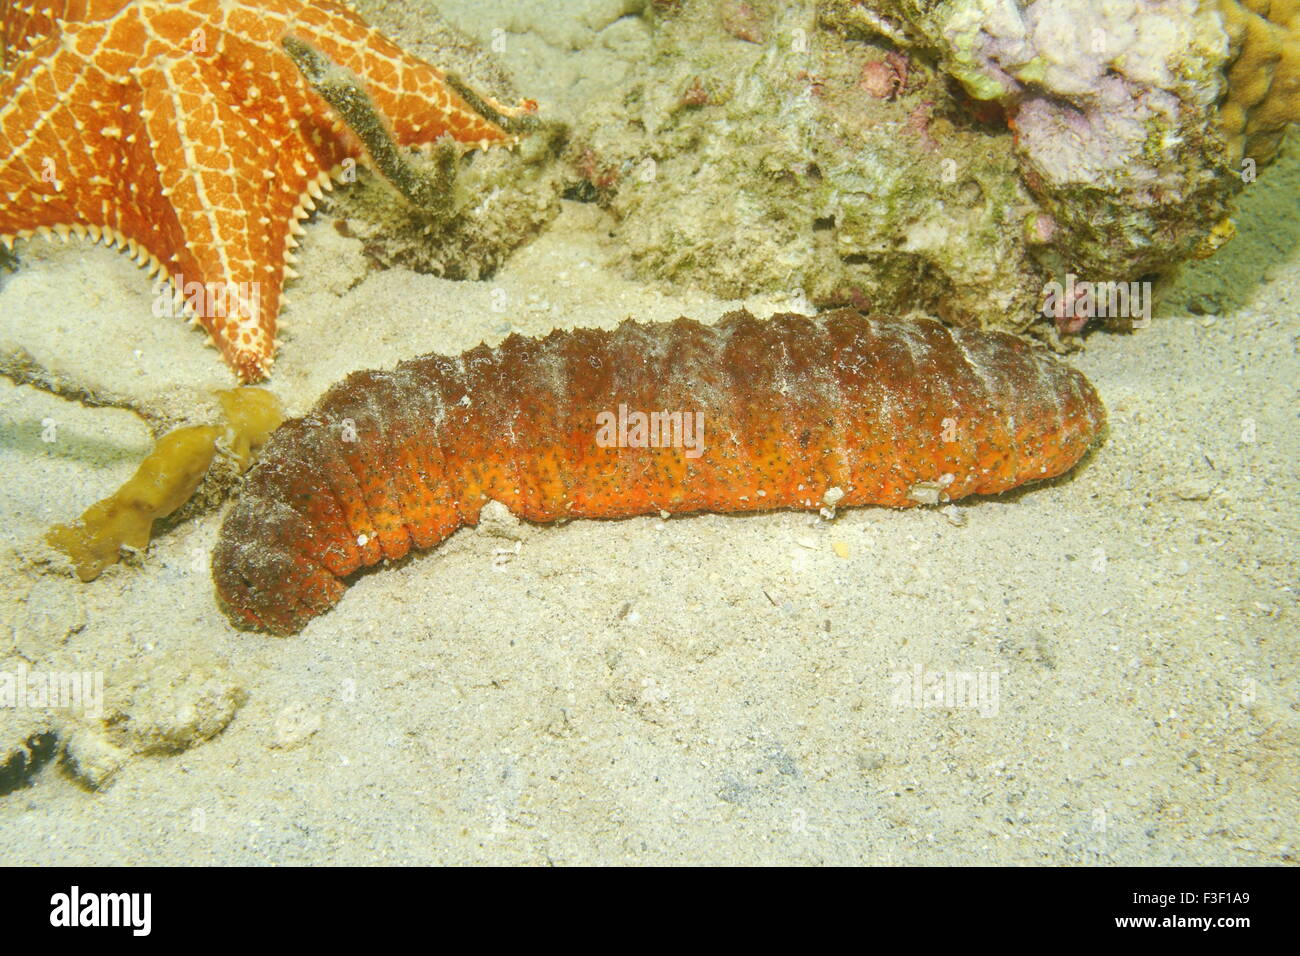 Underwater marine life, Donkey dung sea cucumber, Holothuria mexicana, on the seabed of the Caribbean sea, Mexico Stock Photo